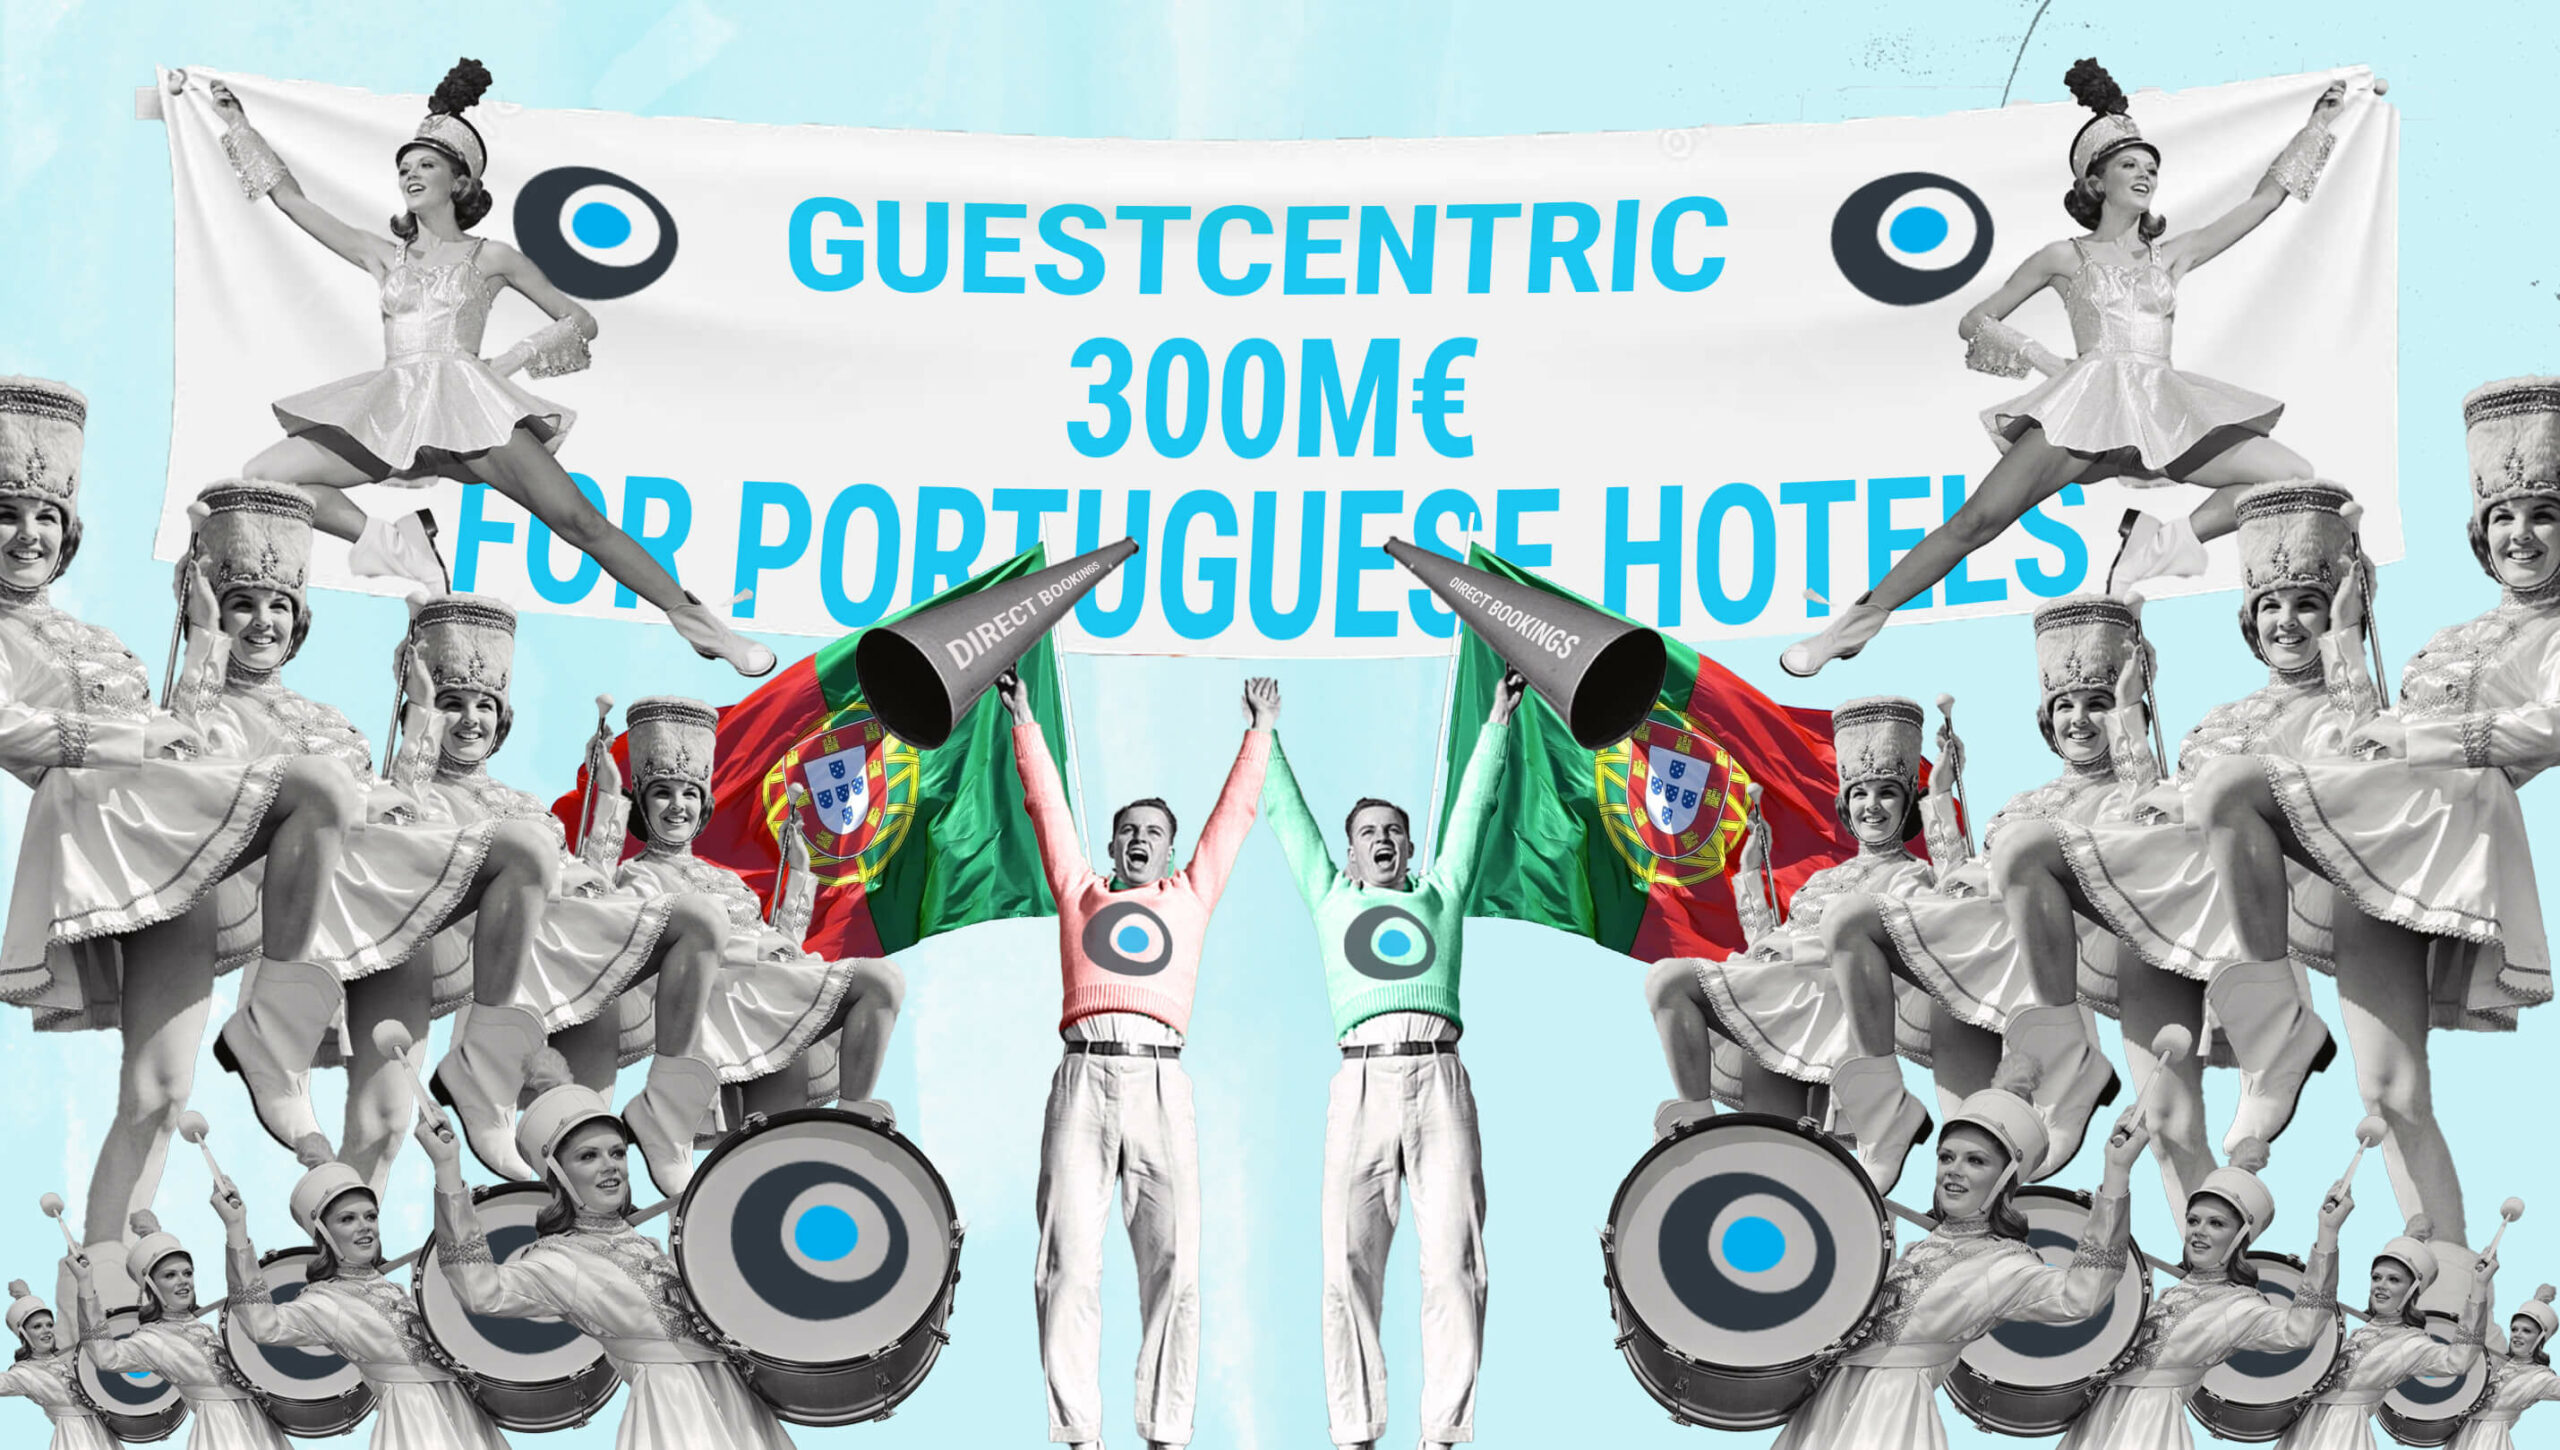 Guestcentric generates nearly €300 million for hotels